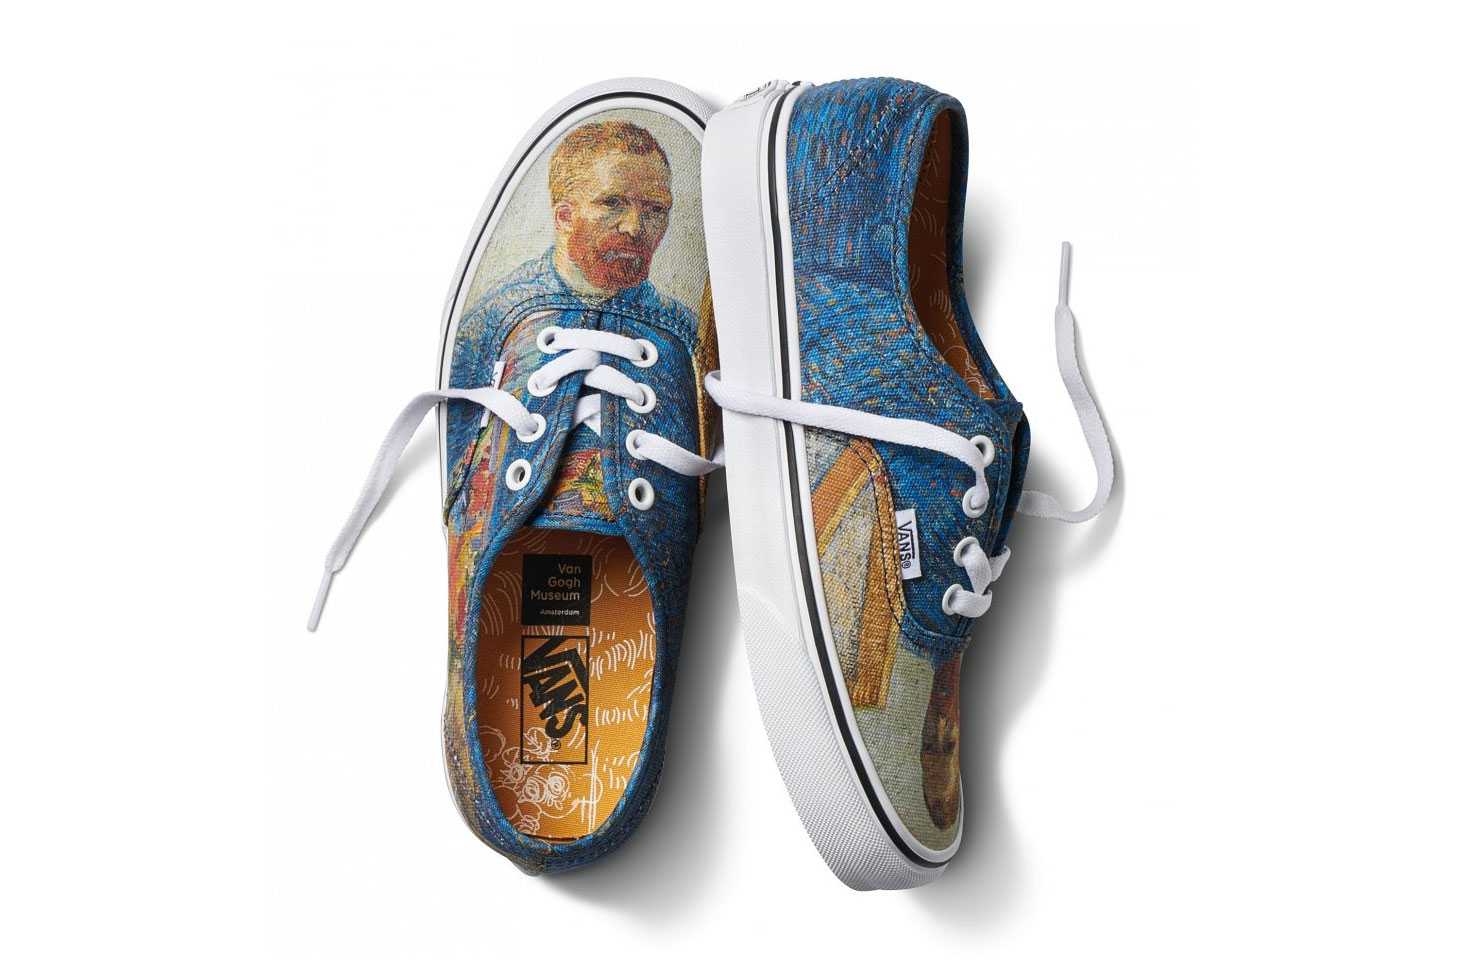 Vans' collaboration with the van gogh museum takes wearable art to a whole new level - galerie